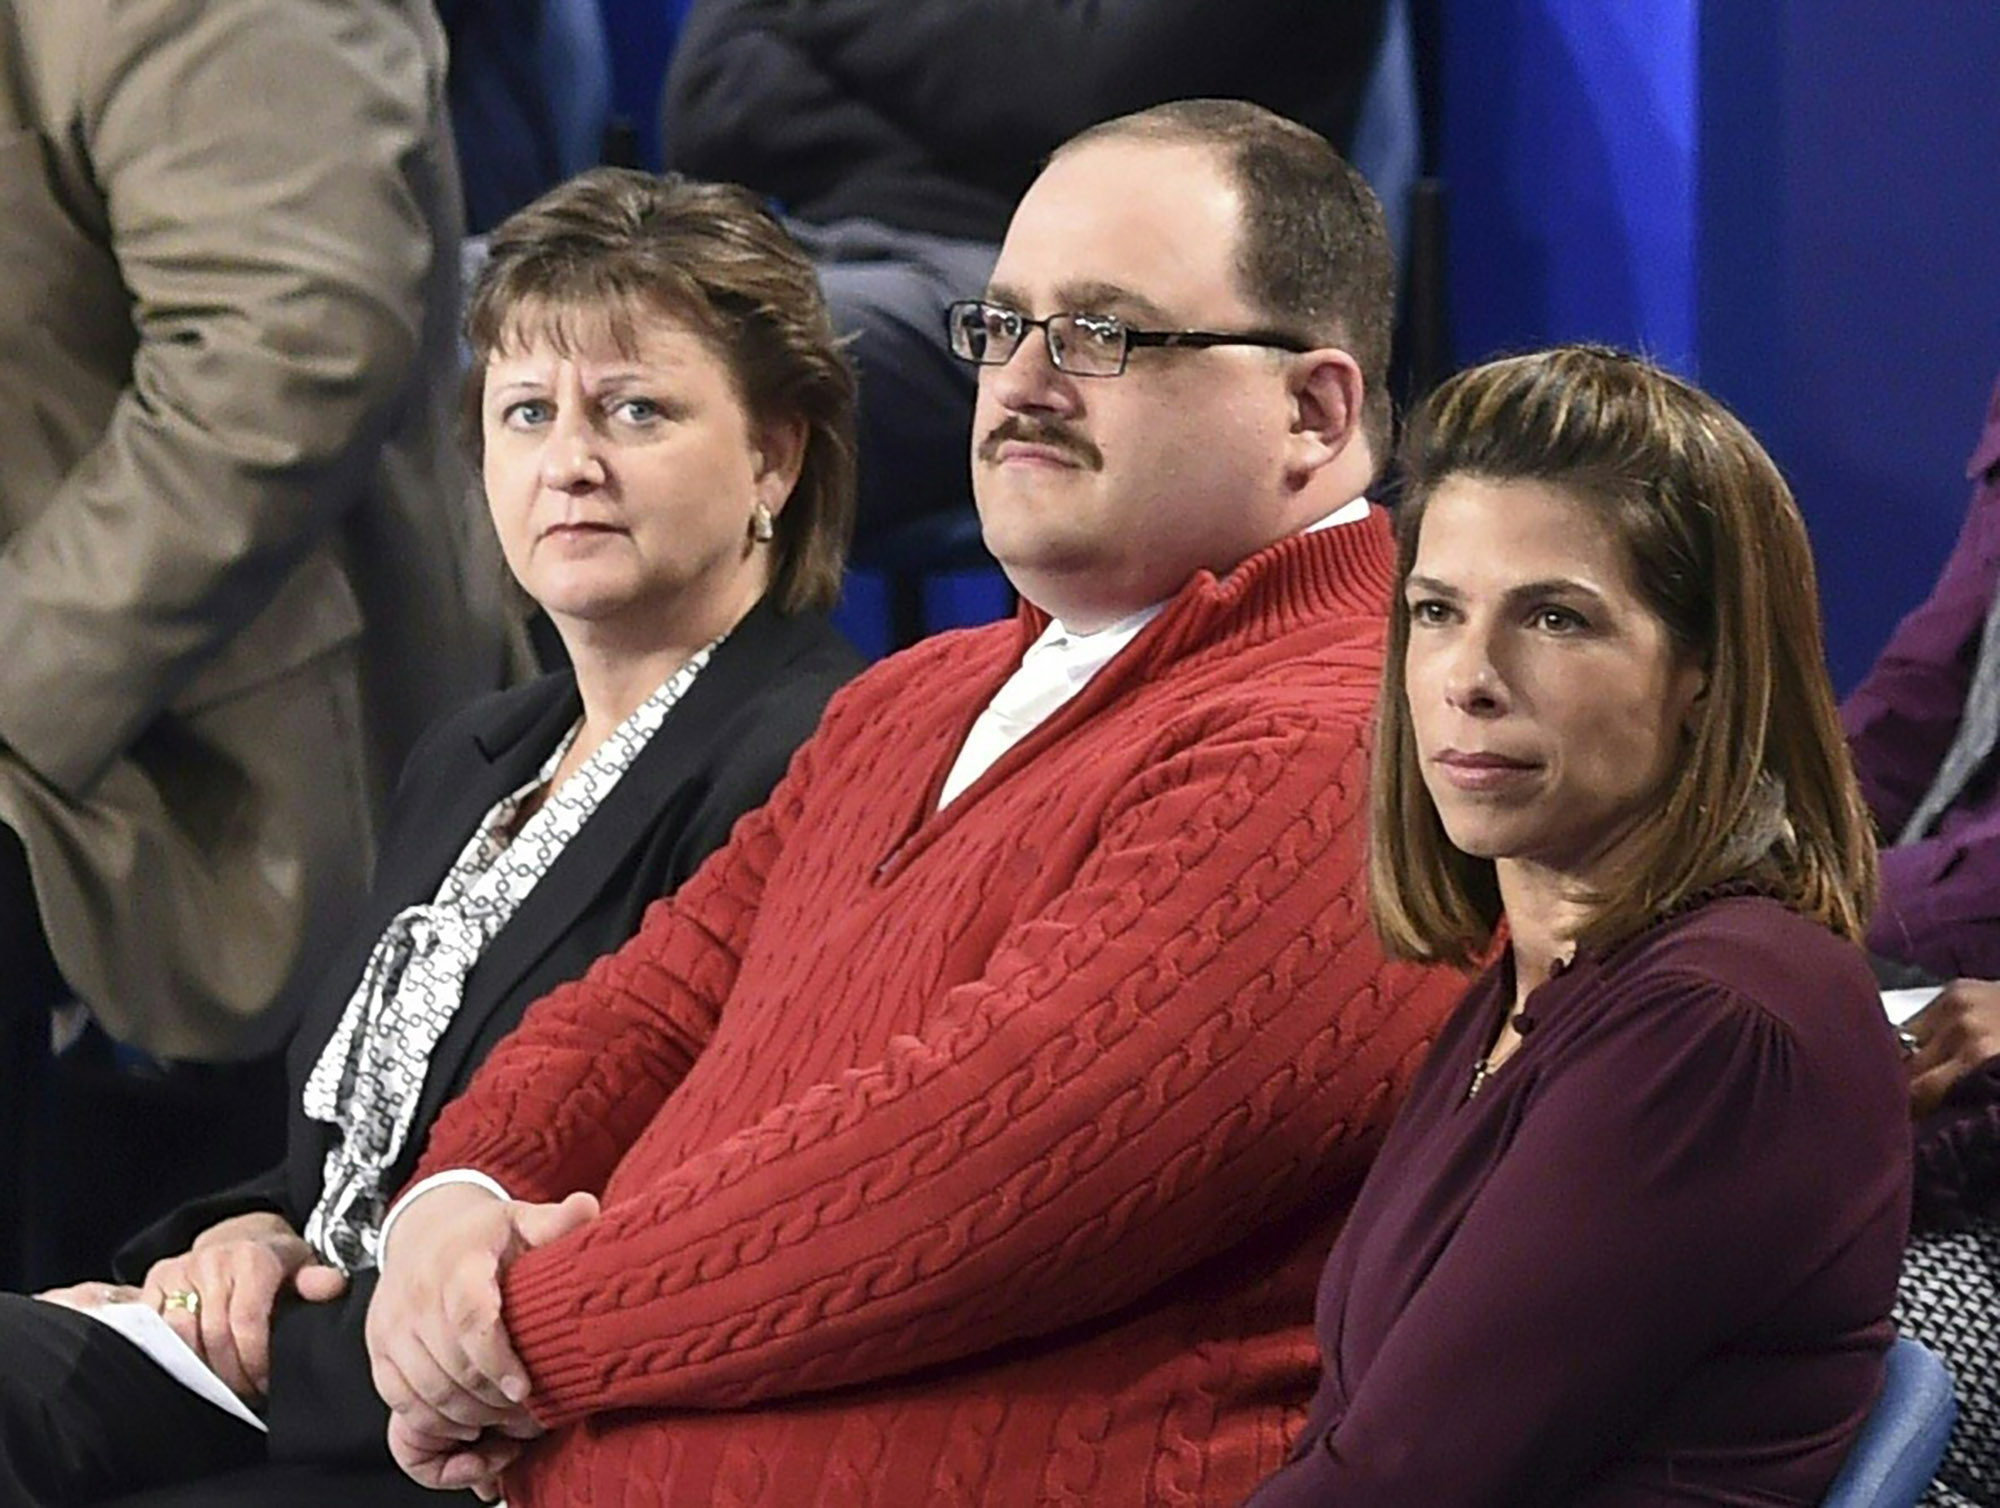 Ken Bone (C) listens to US Democratic nominee Hillary Clinton and Republican nominee Donald Trump during the second presidential debate at Washington University in St. Louis on Oct. 9, 2016. (Paul J. Richards—AFP/Getty Images)